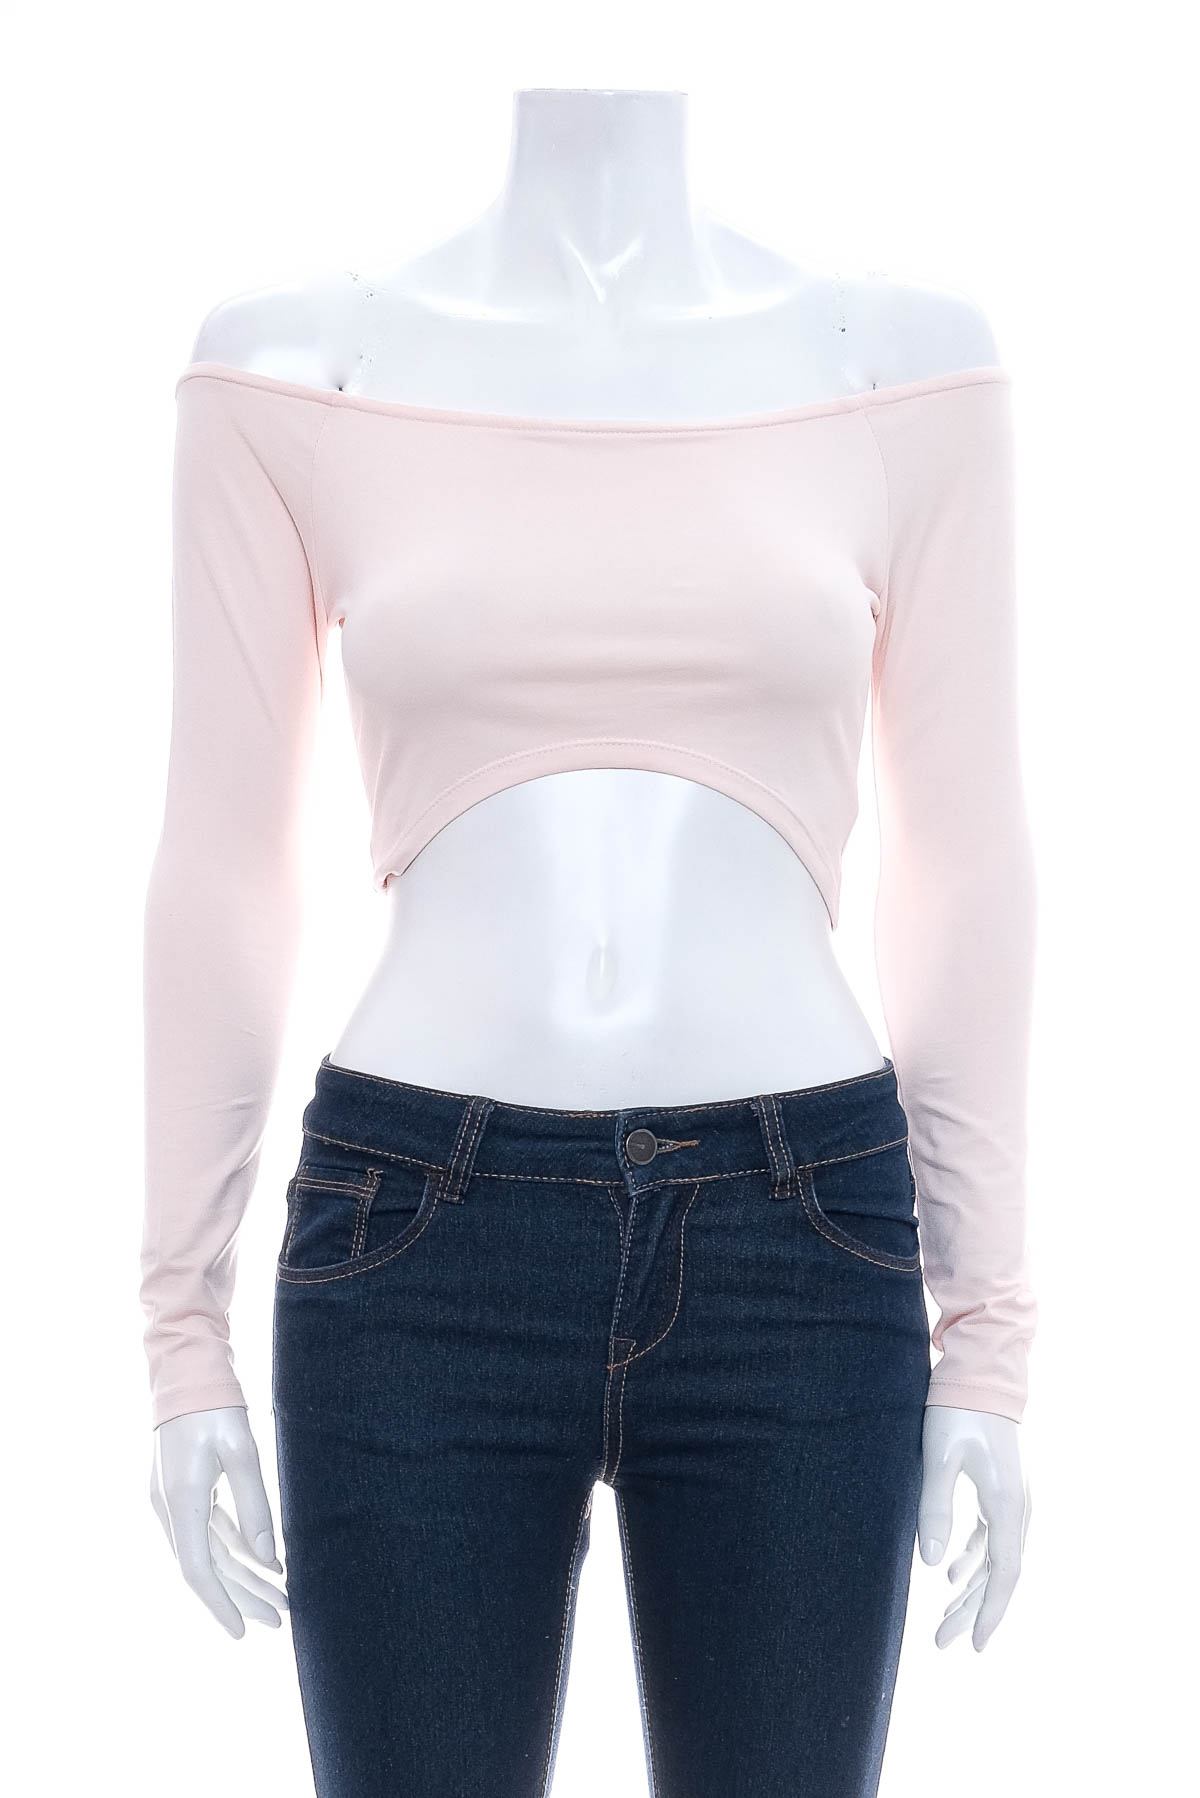 Women's blouse - NLY Trend - 0